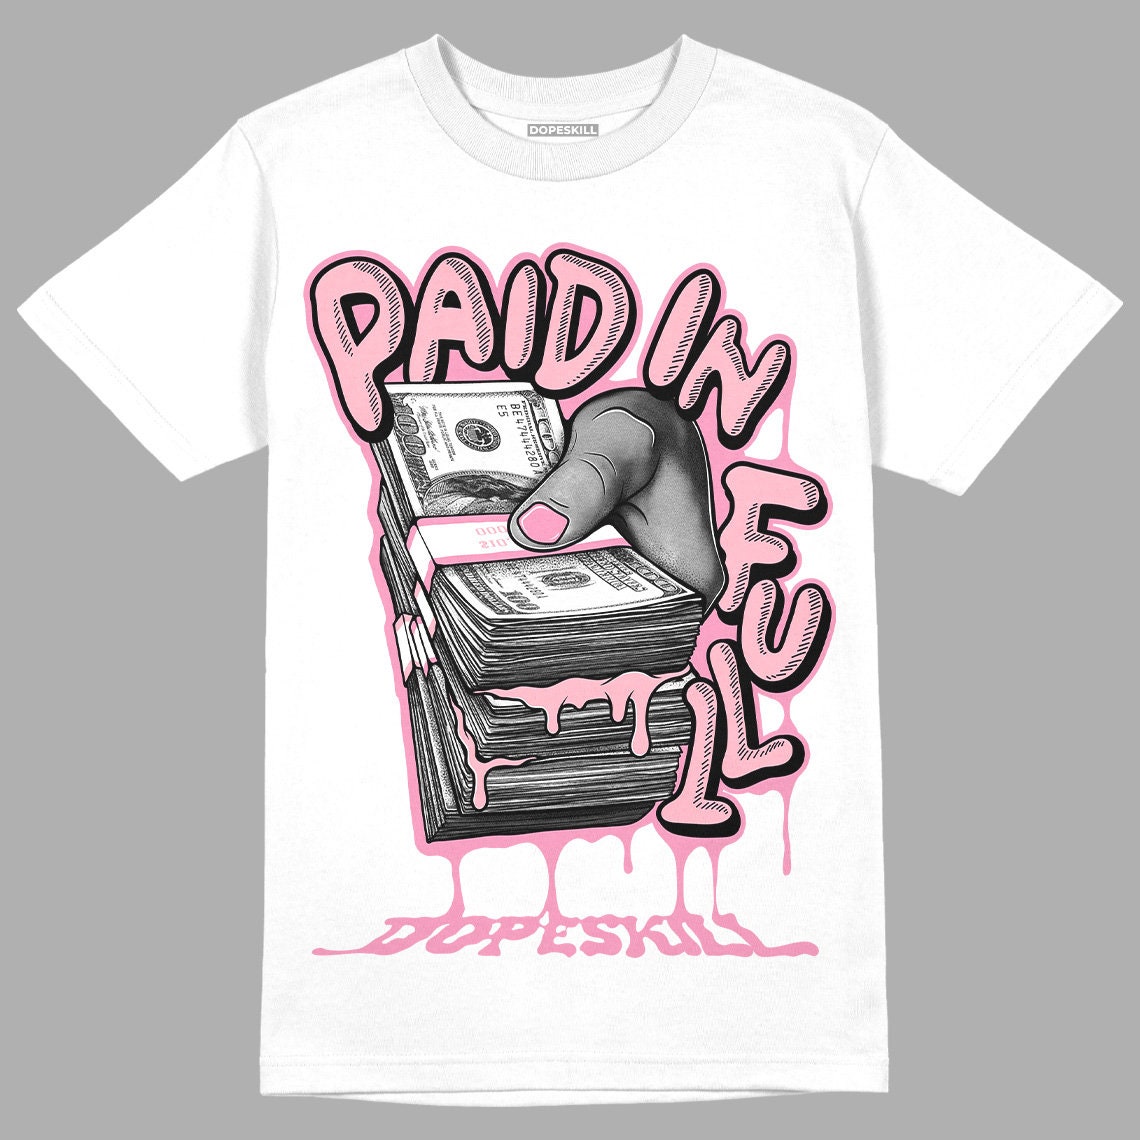 Mitch paid in full shirt. Paid in full tee